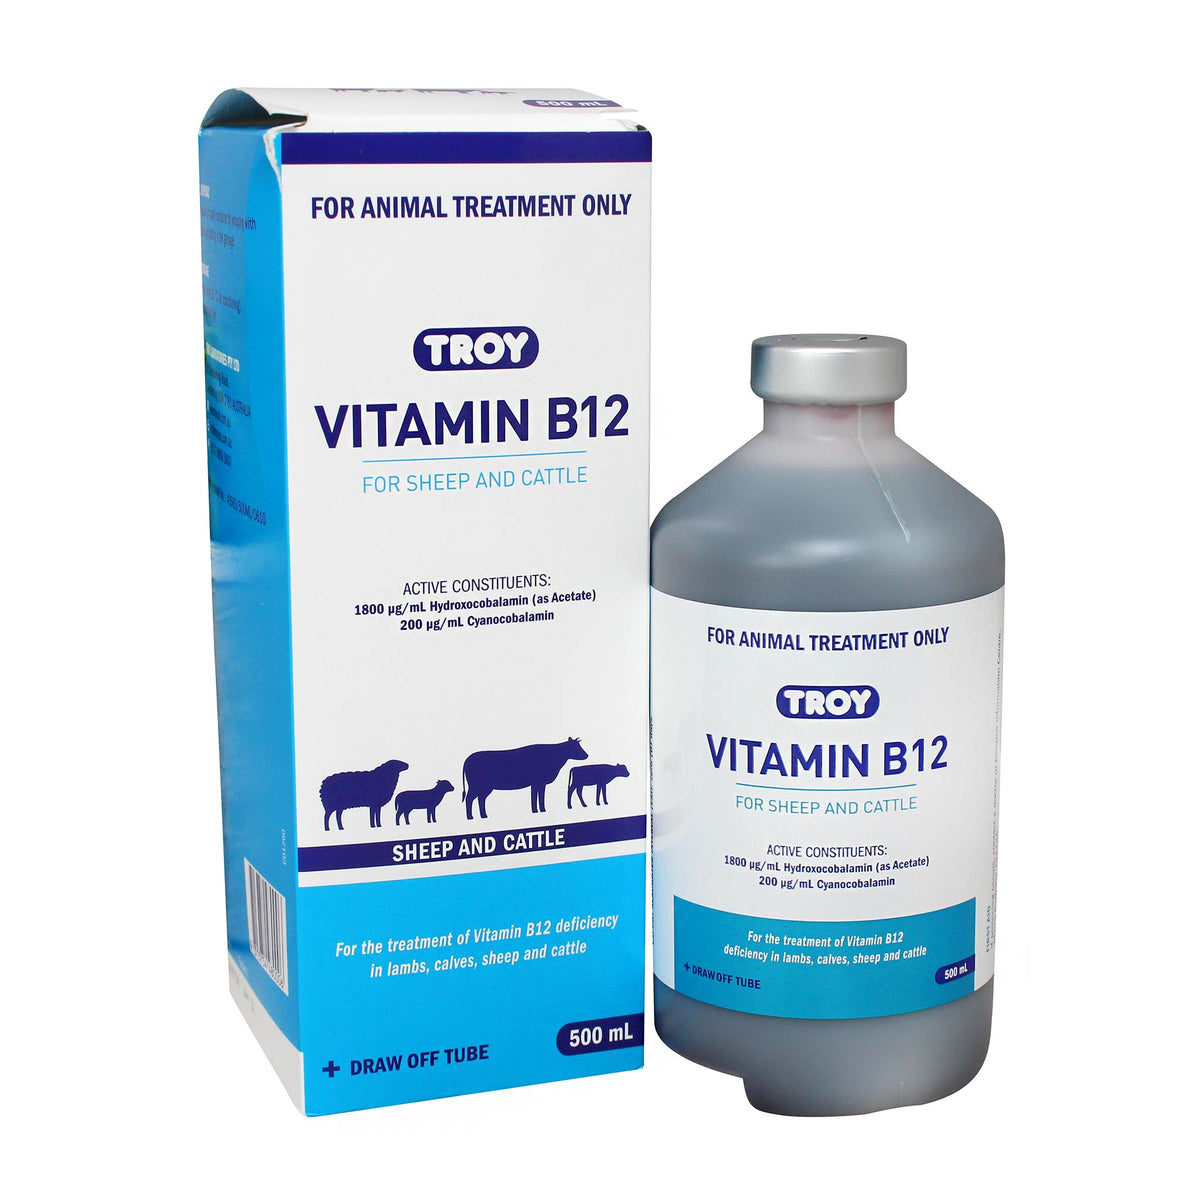 Troy Vitamin B12 for Sheep and Cattle 500mL